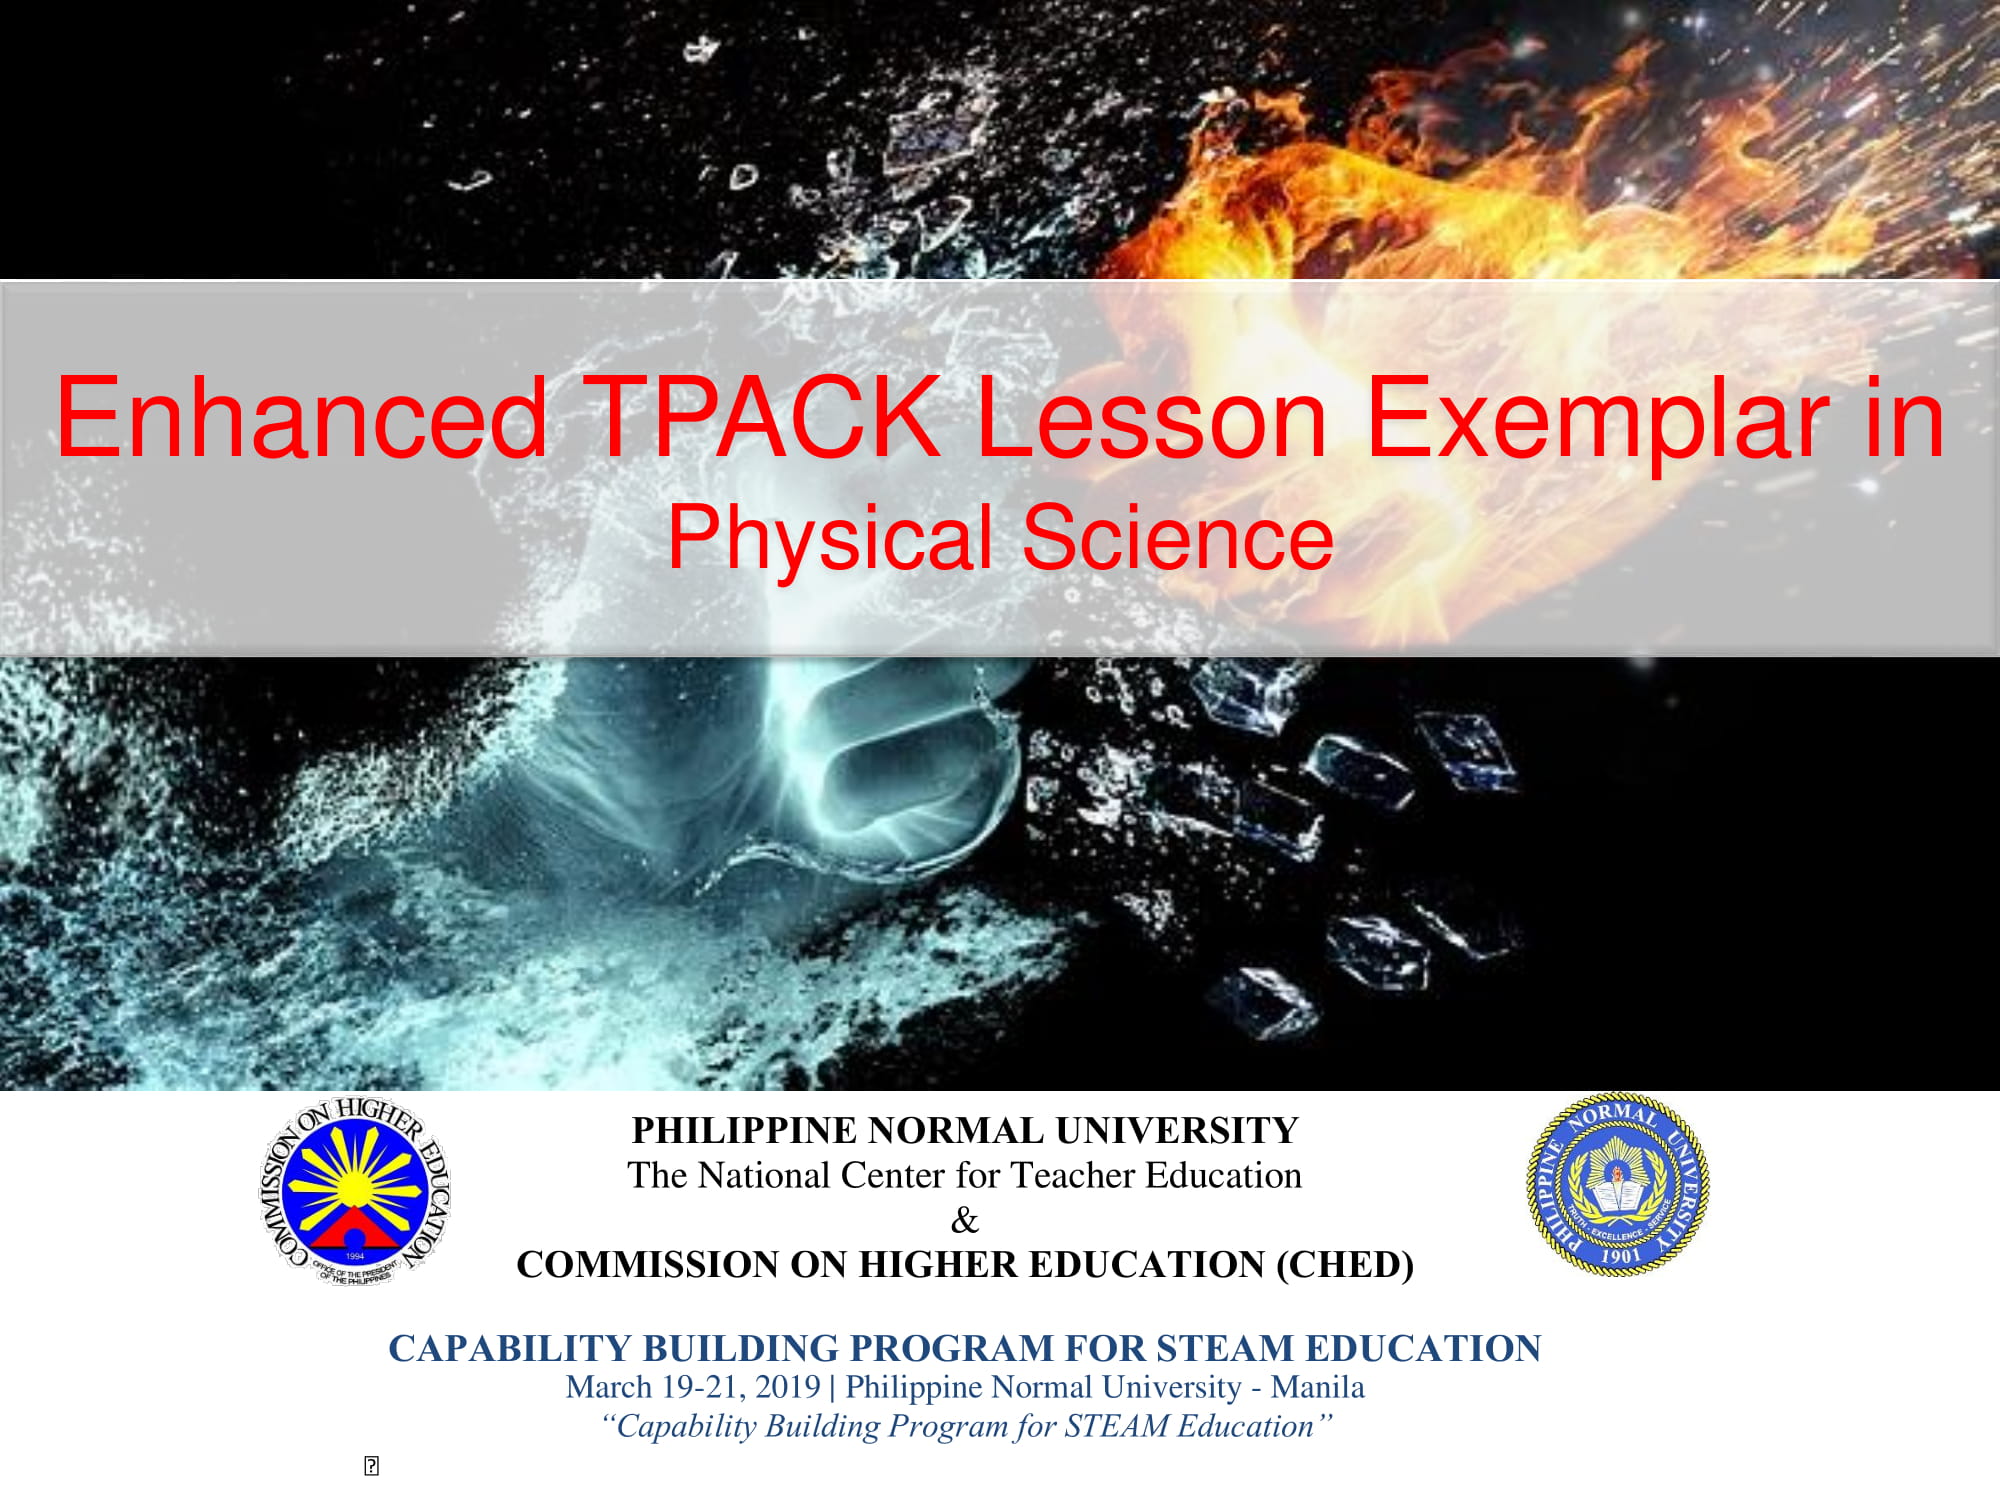 Cover for Science (Physics & Chemistry) Lesson Exemplar (The Law of Thermodynamics)